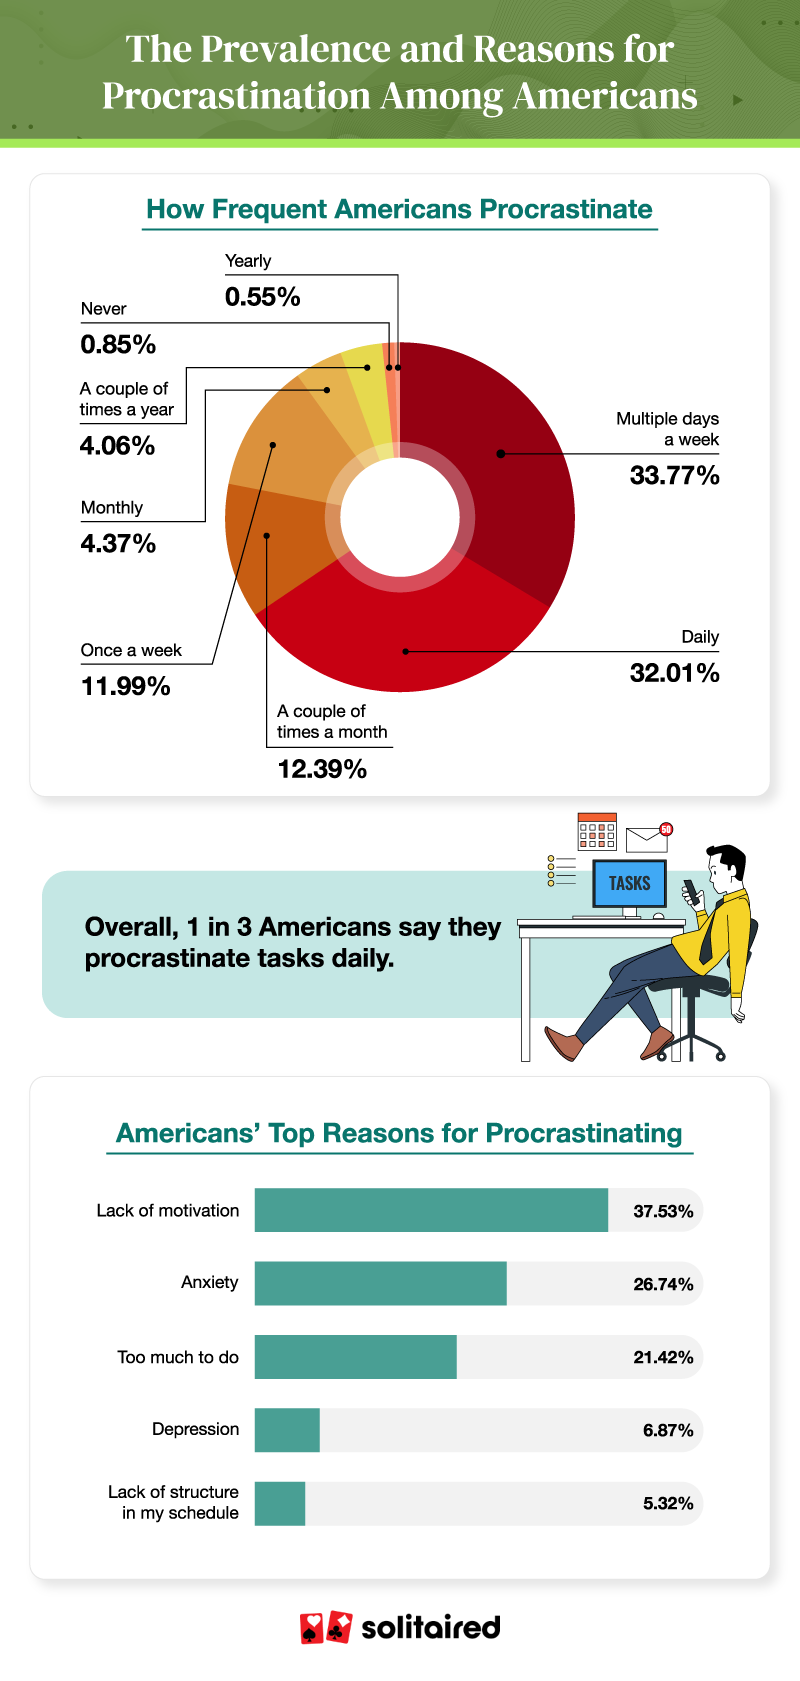 A donut chart showing how often Americans procrastinate and a bar chart showing the top reasons